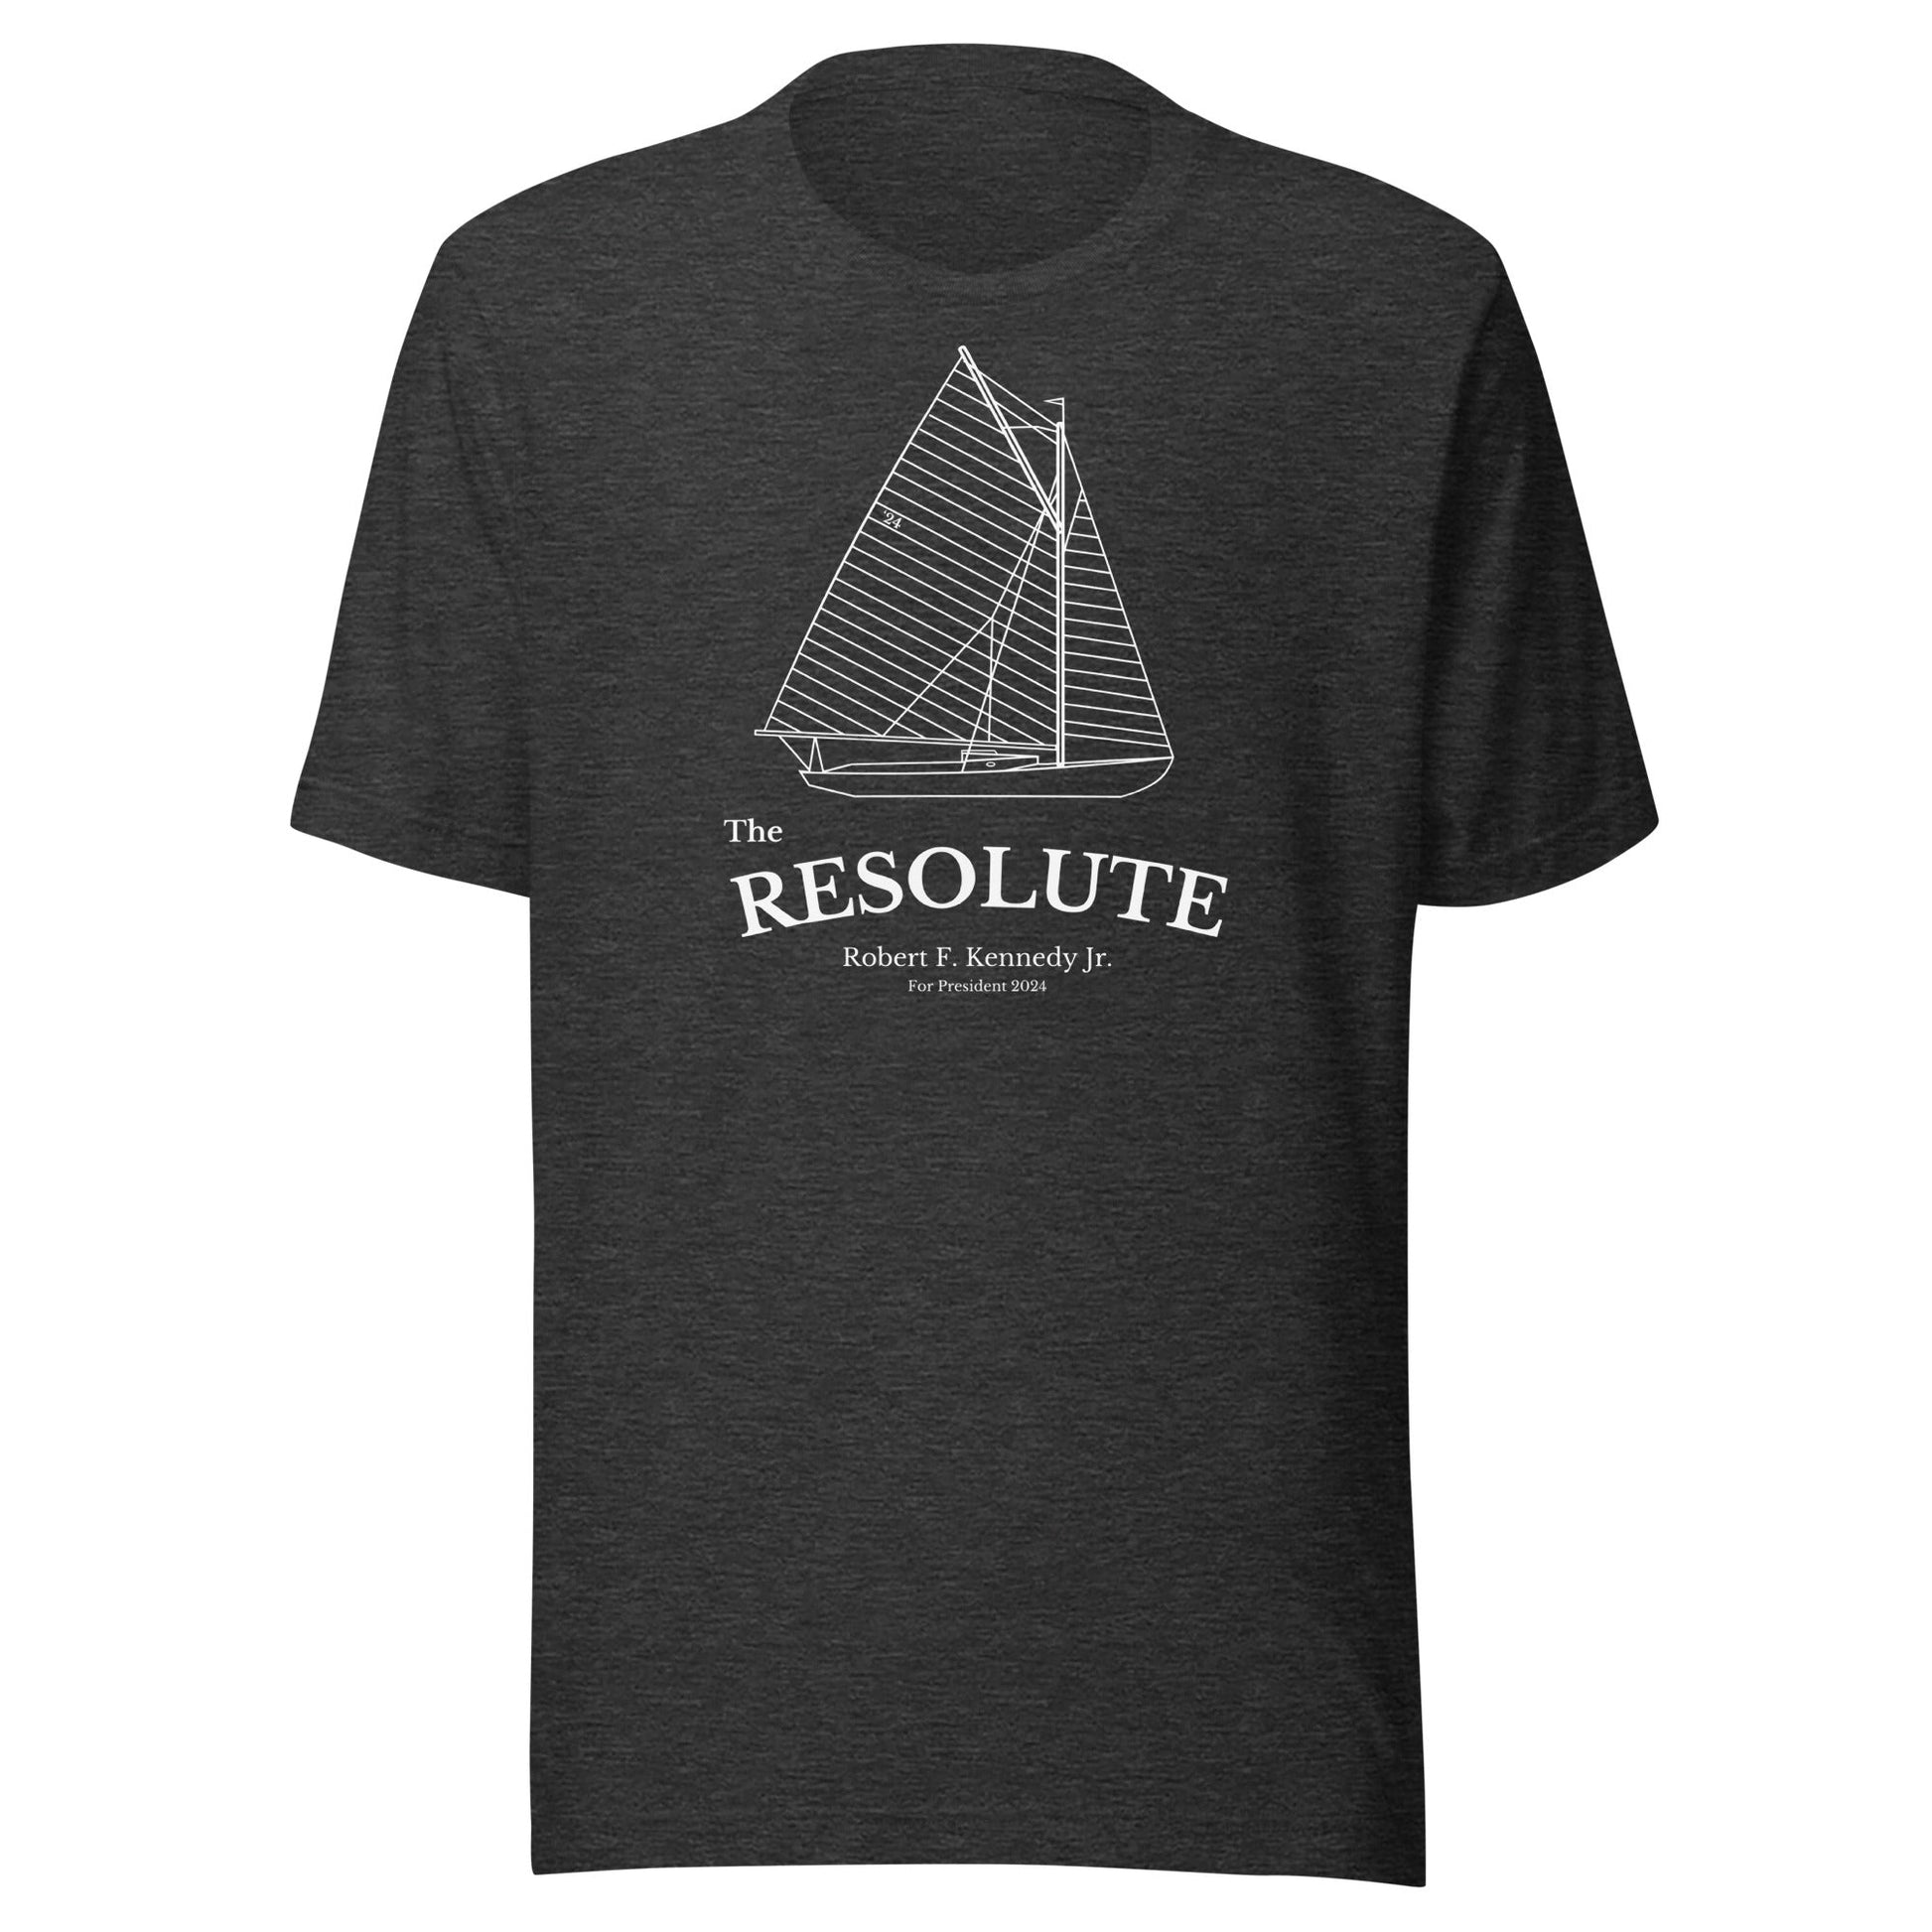 The Resolute Unisex Tee - TEAM KENNEDY. All rights reserved